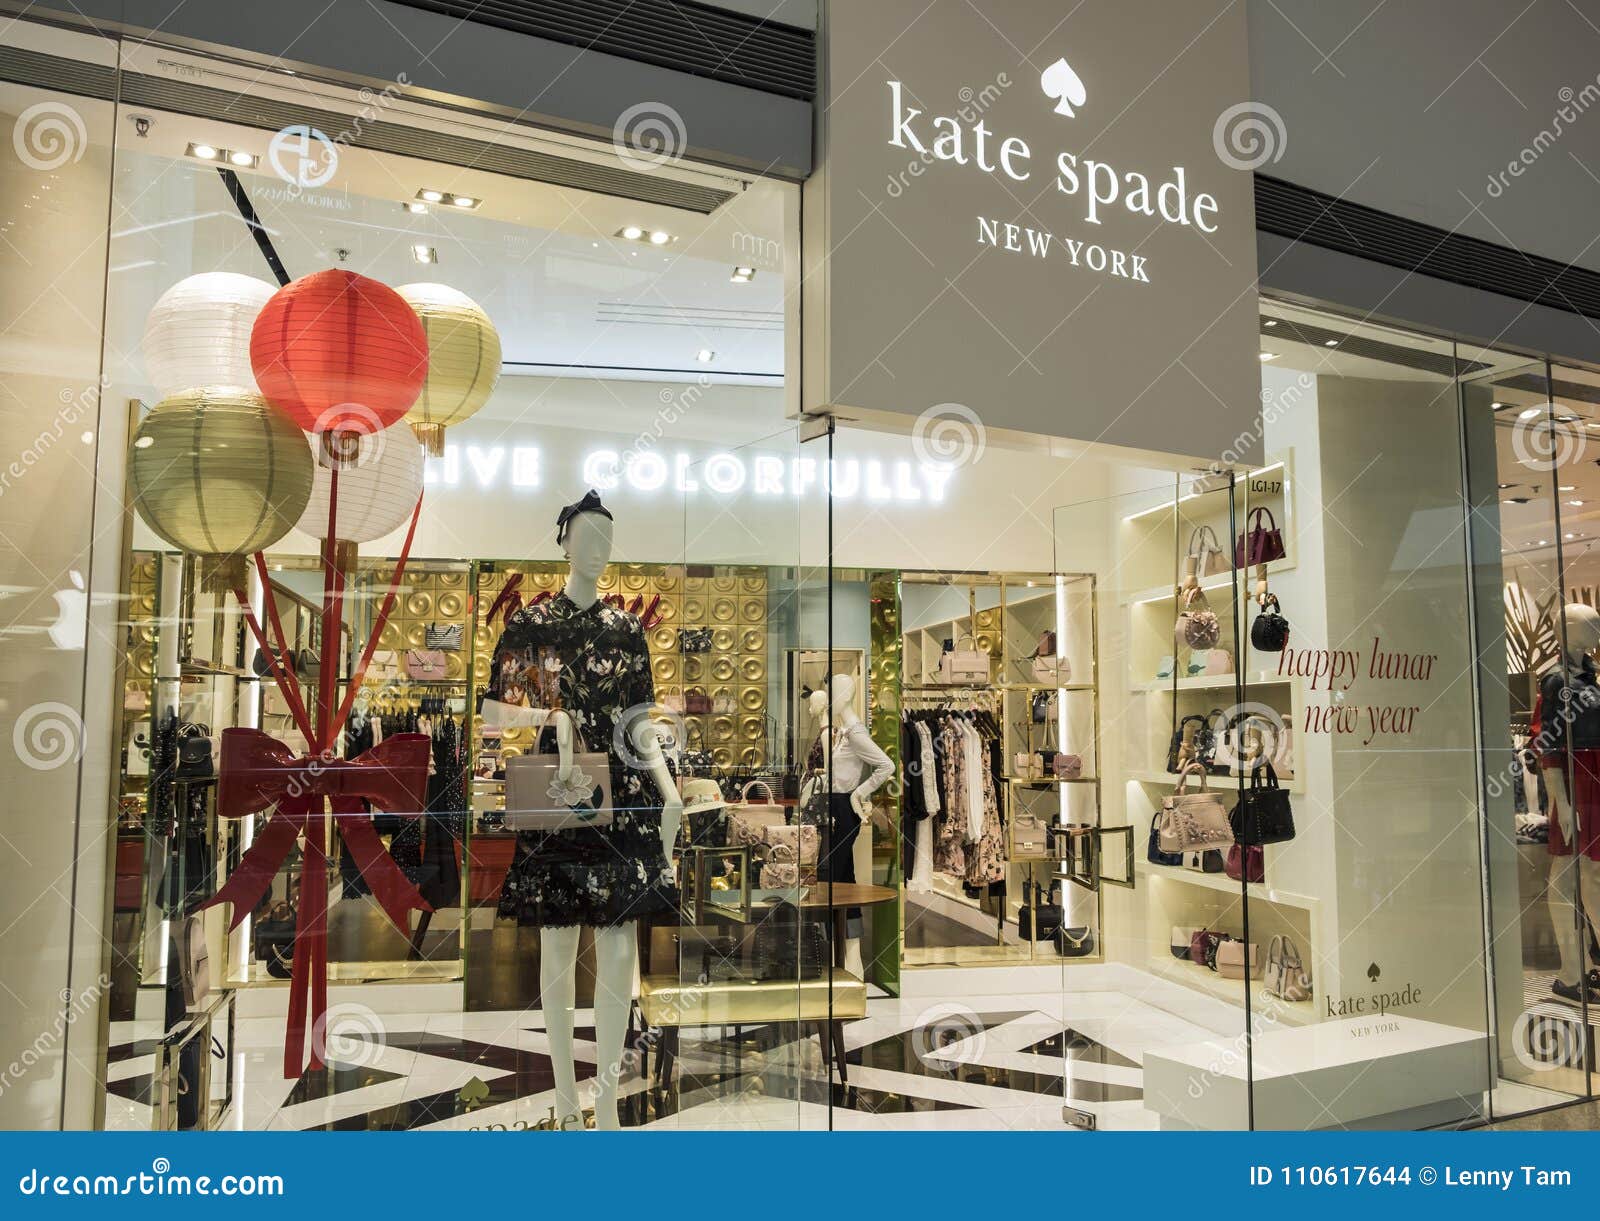 Kate Spade Store in Hong Kong. Kate Spade New York is an American Fashion  Design House Editorial Stock Image - Image of global, mall: 110617644